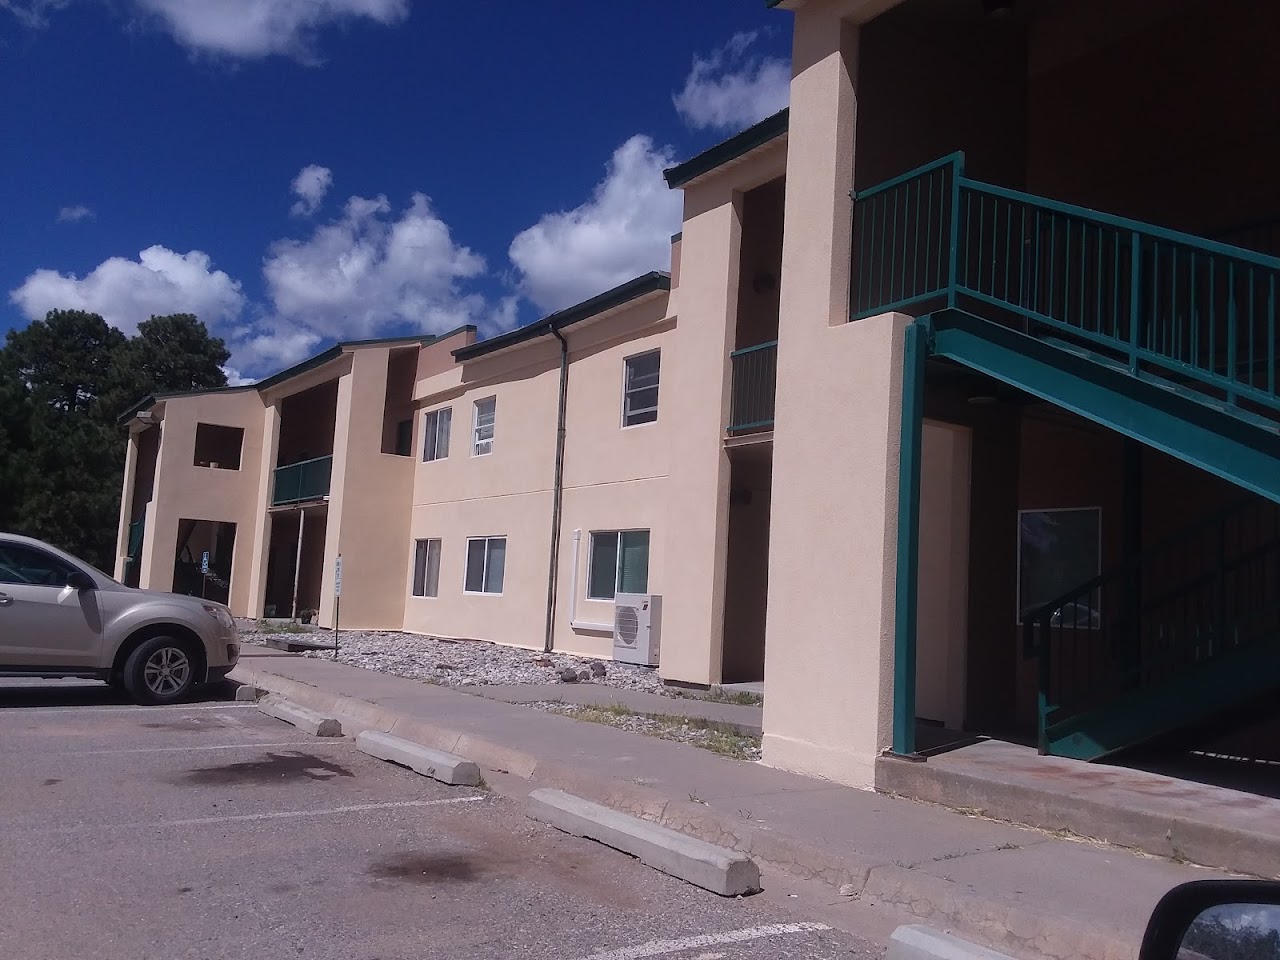 Photo of CABALLO PEAK APTS. Affordable housing located at 3301 CANYON RD LOS ALAMOS, NM 87544